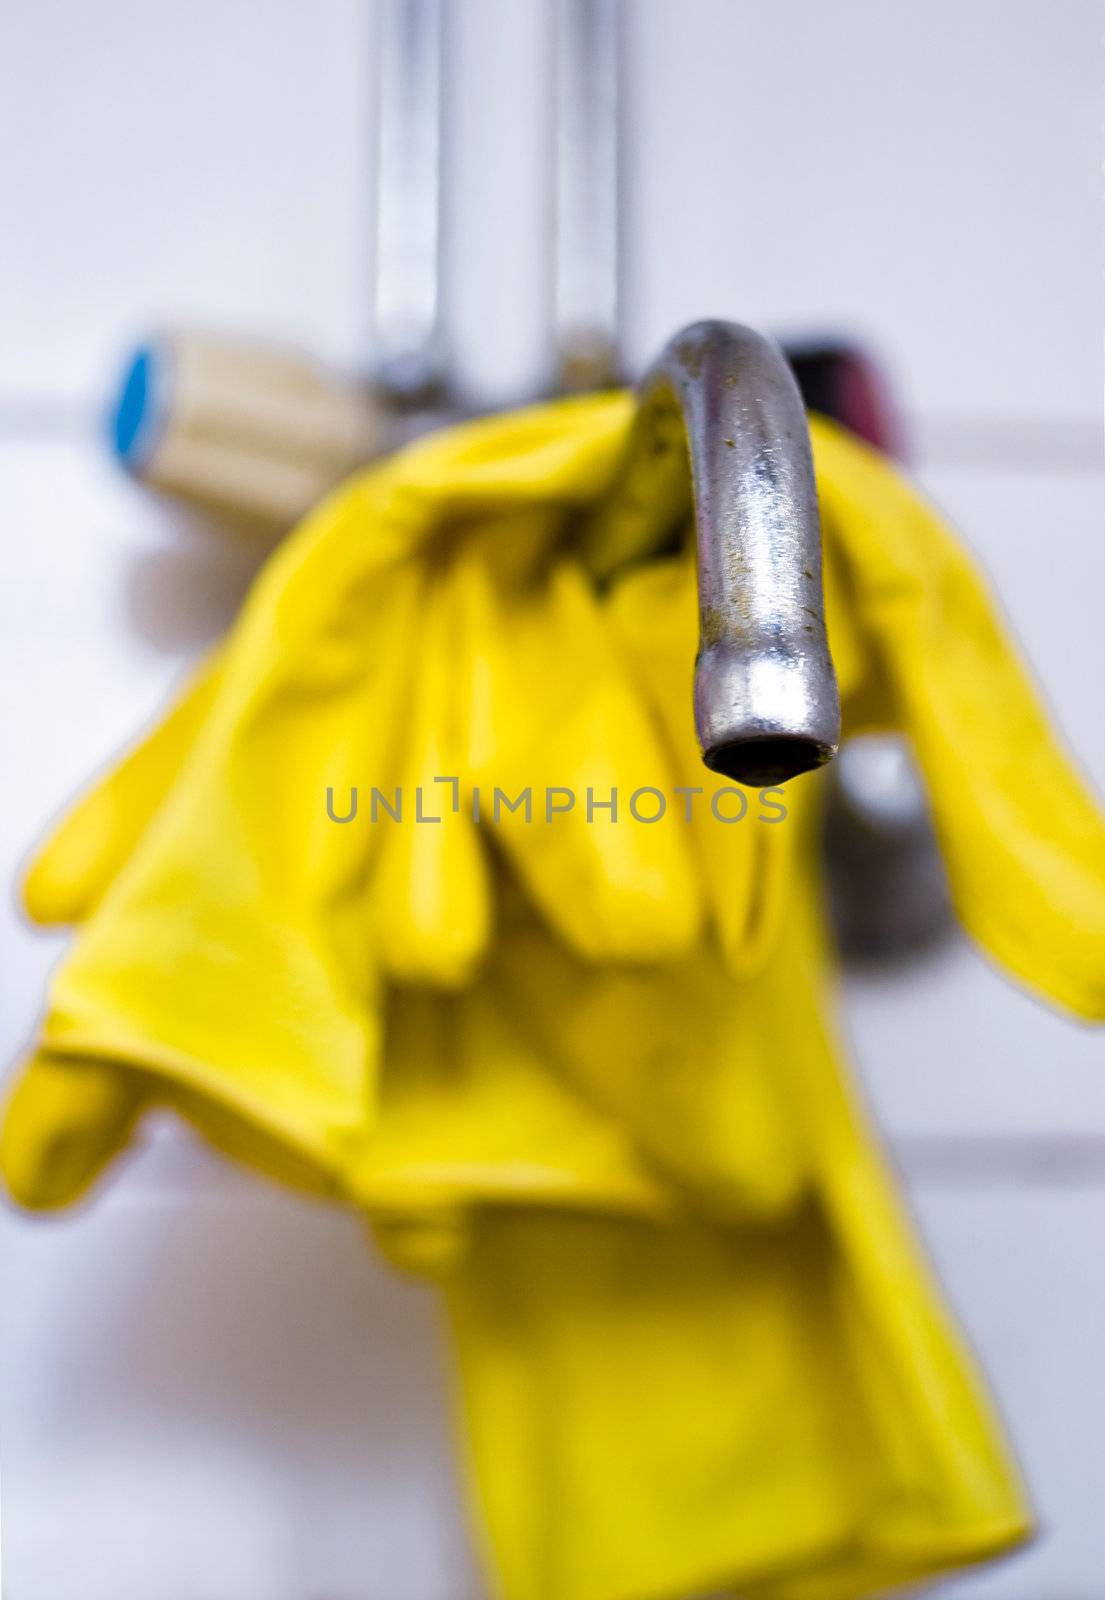 Yellow glove placed on faucet waiting for cleaning